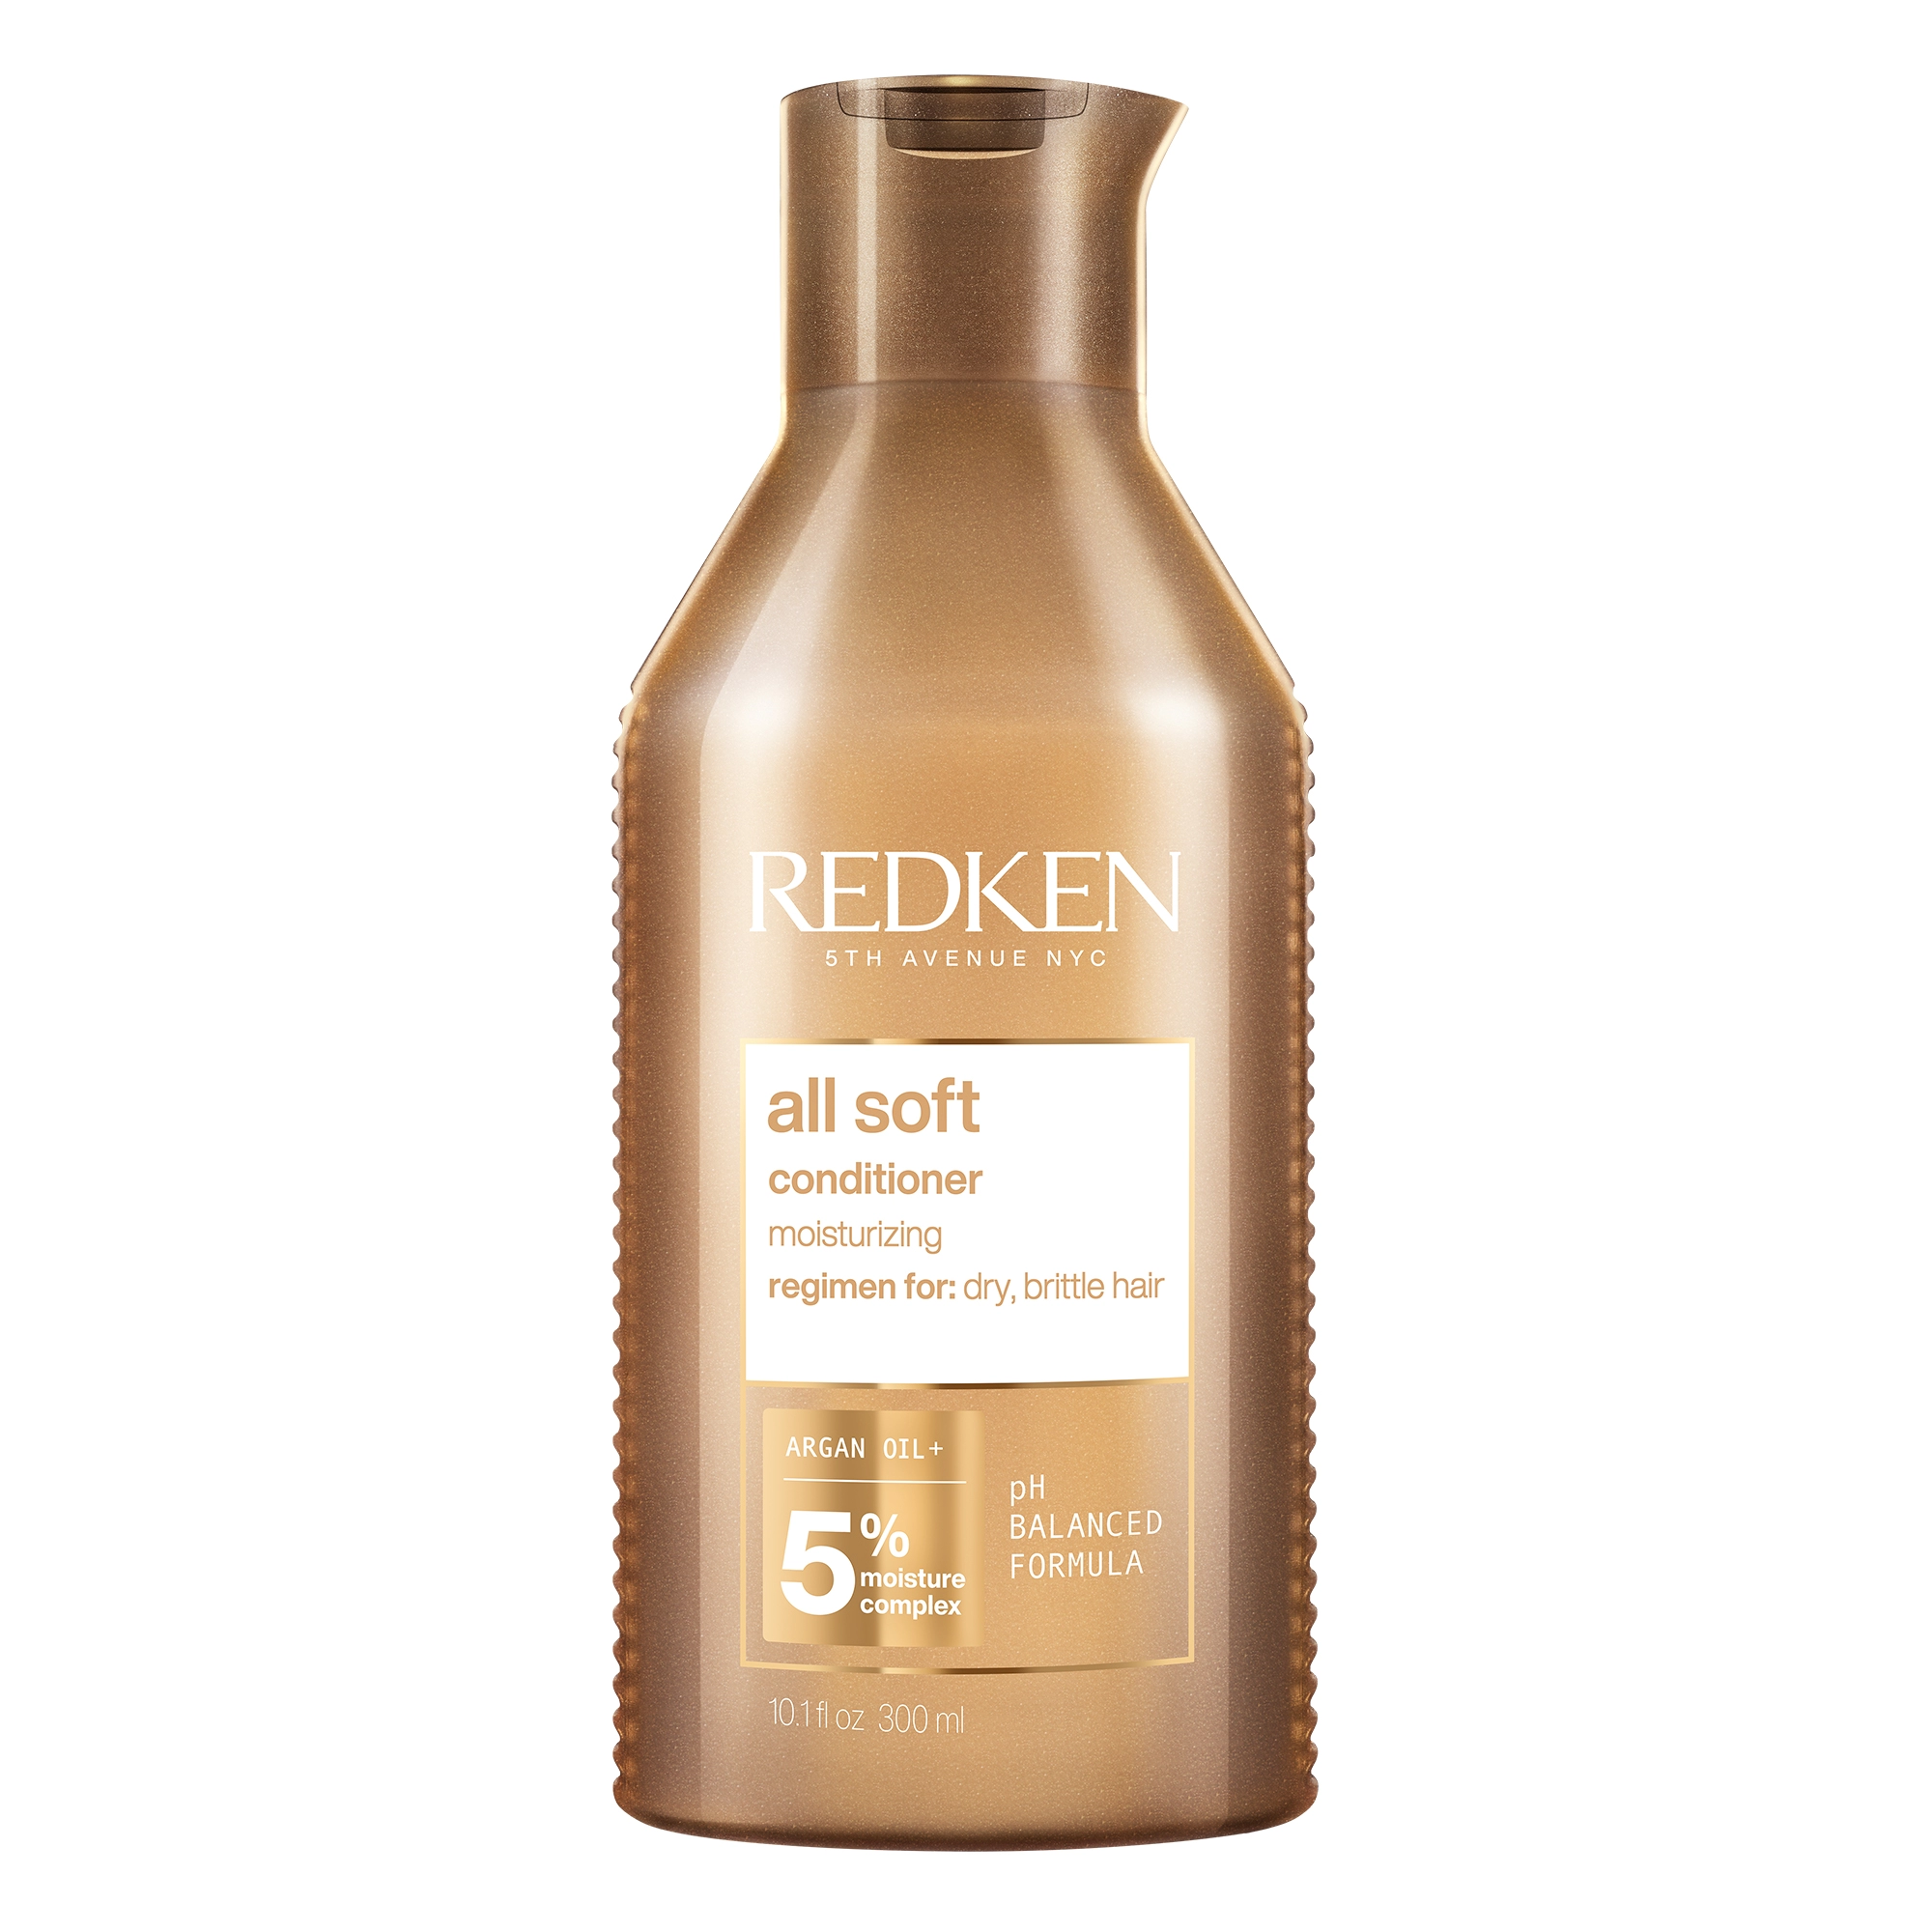 Redken 2020 All Soft Conditioner Product Shot 2000x2000 1 jpg